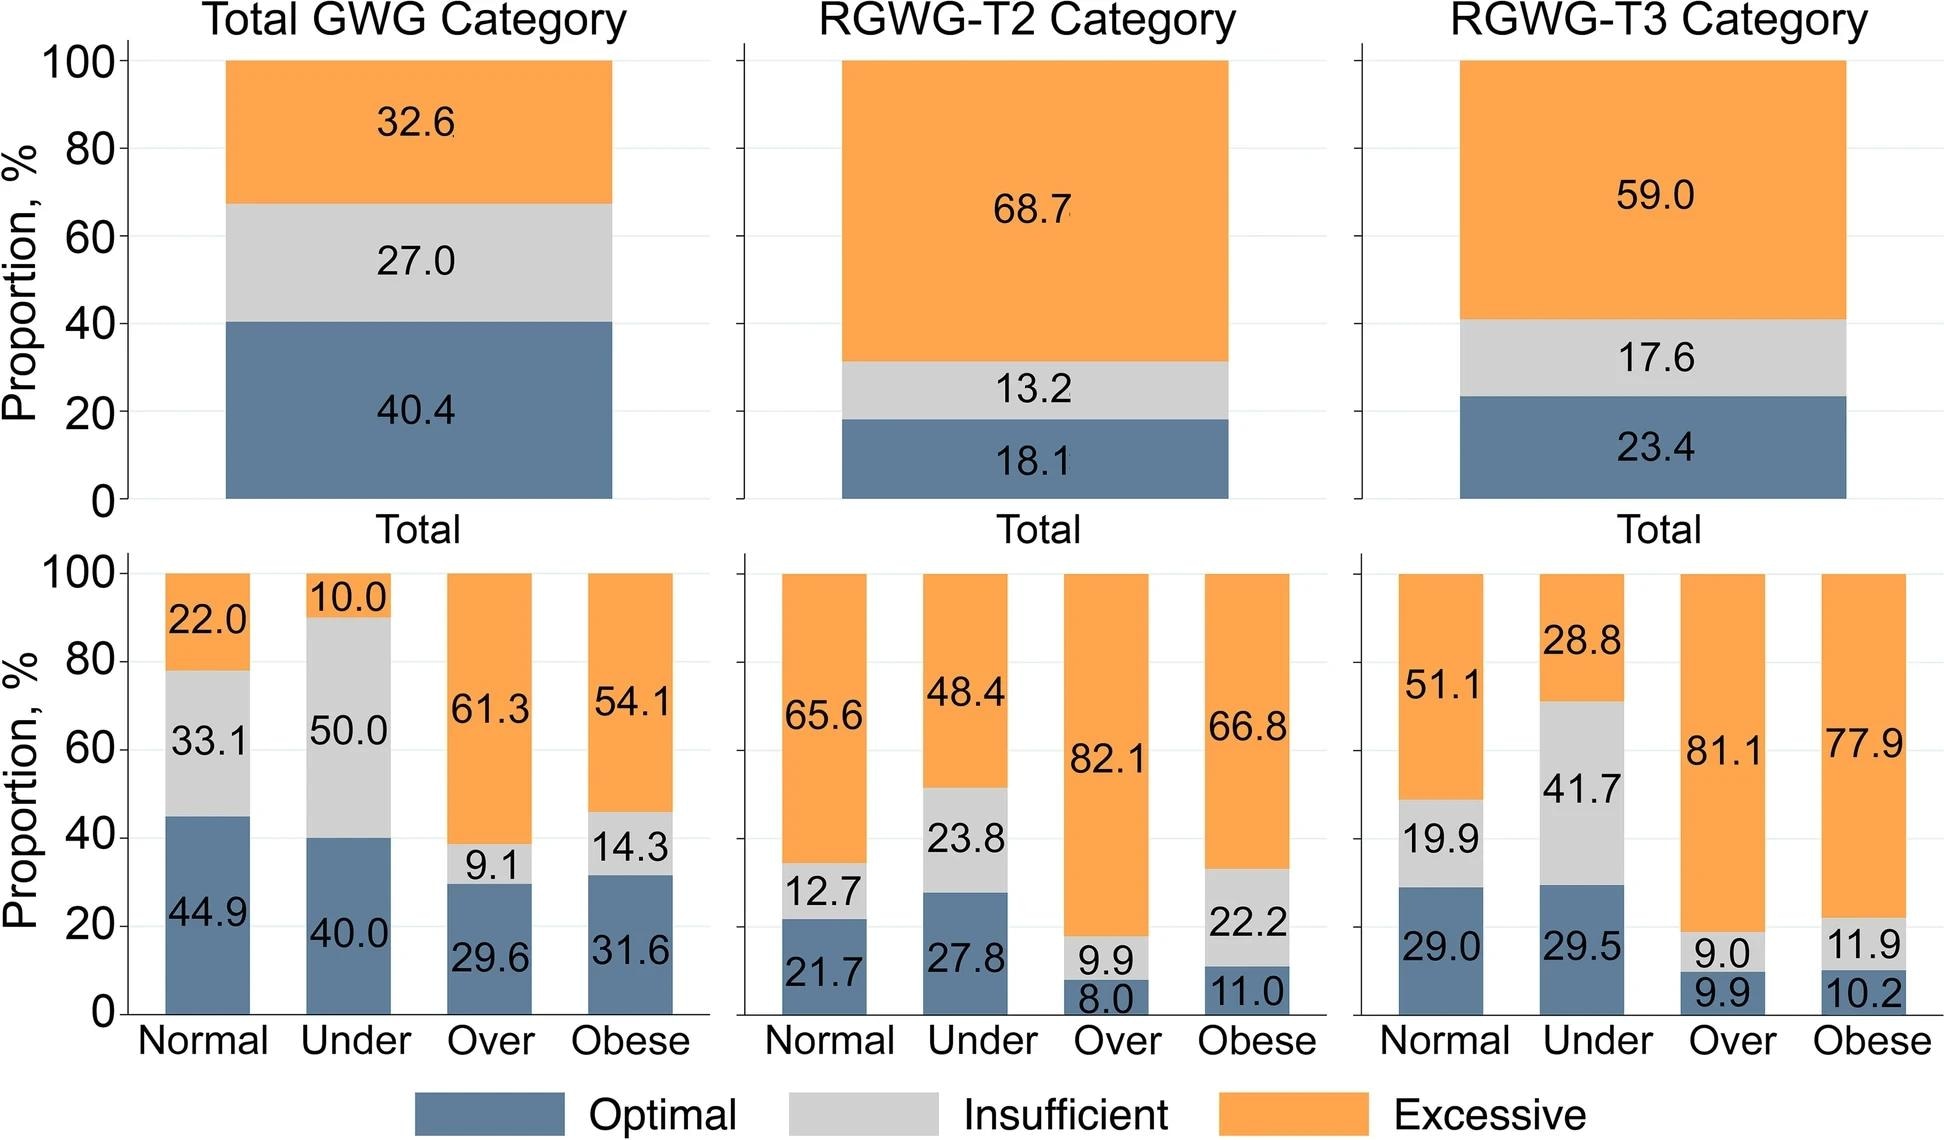 Distributions of total GWG (kg), RGWG-T2, and RGWG-T3 categories according to the IOM guidelines